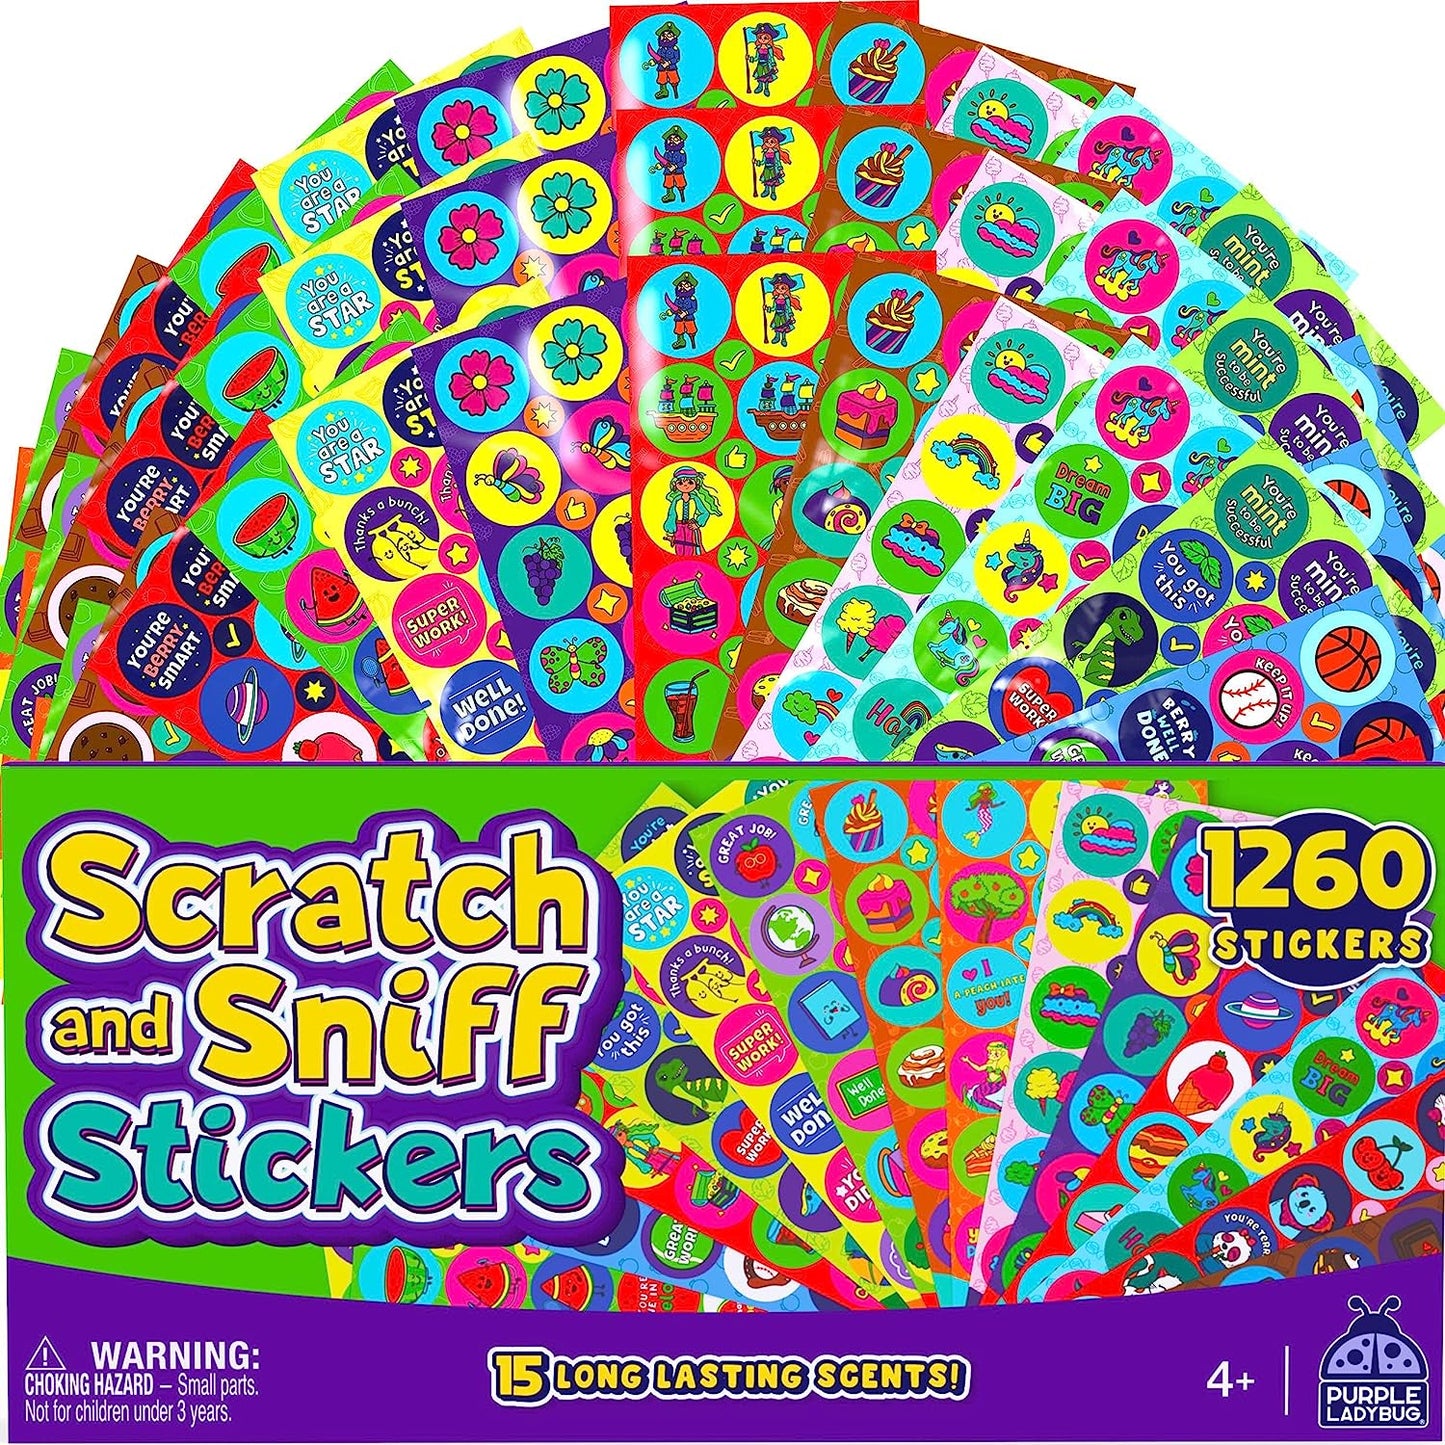 Scented Stickers - 45 Sheets of Scented Stickers